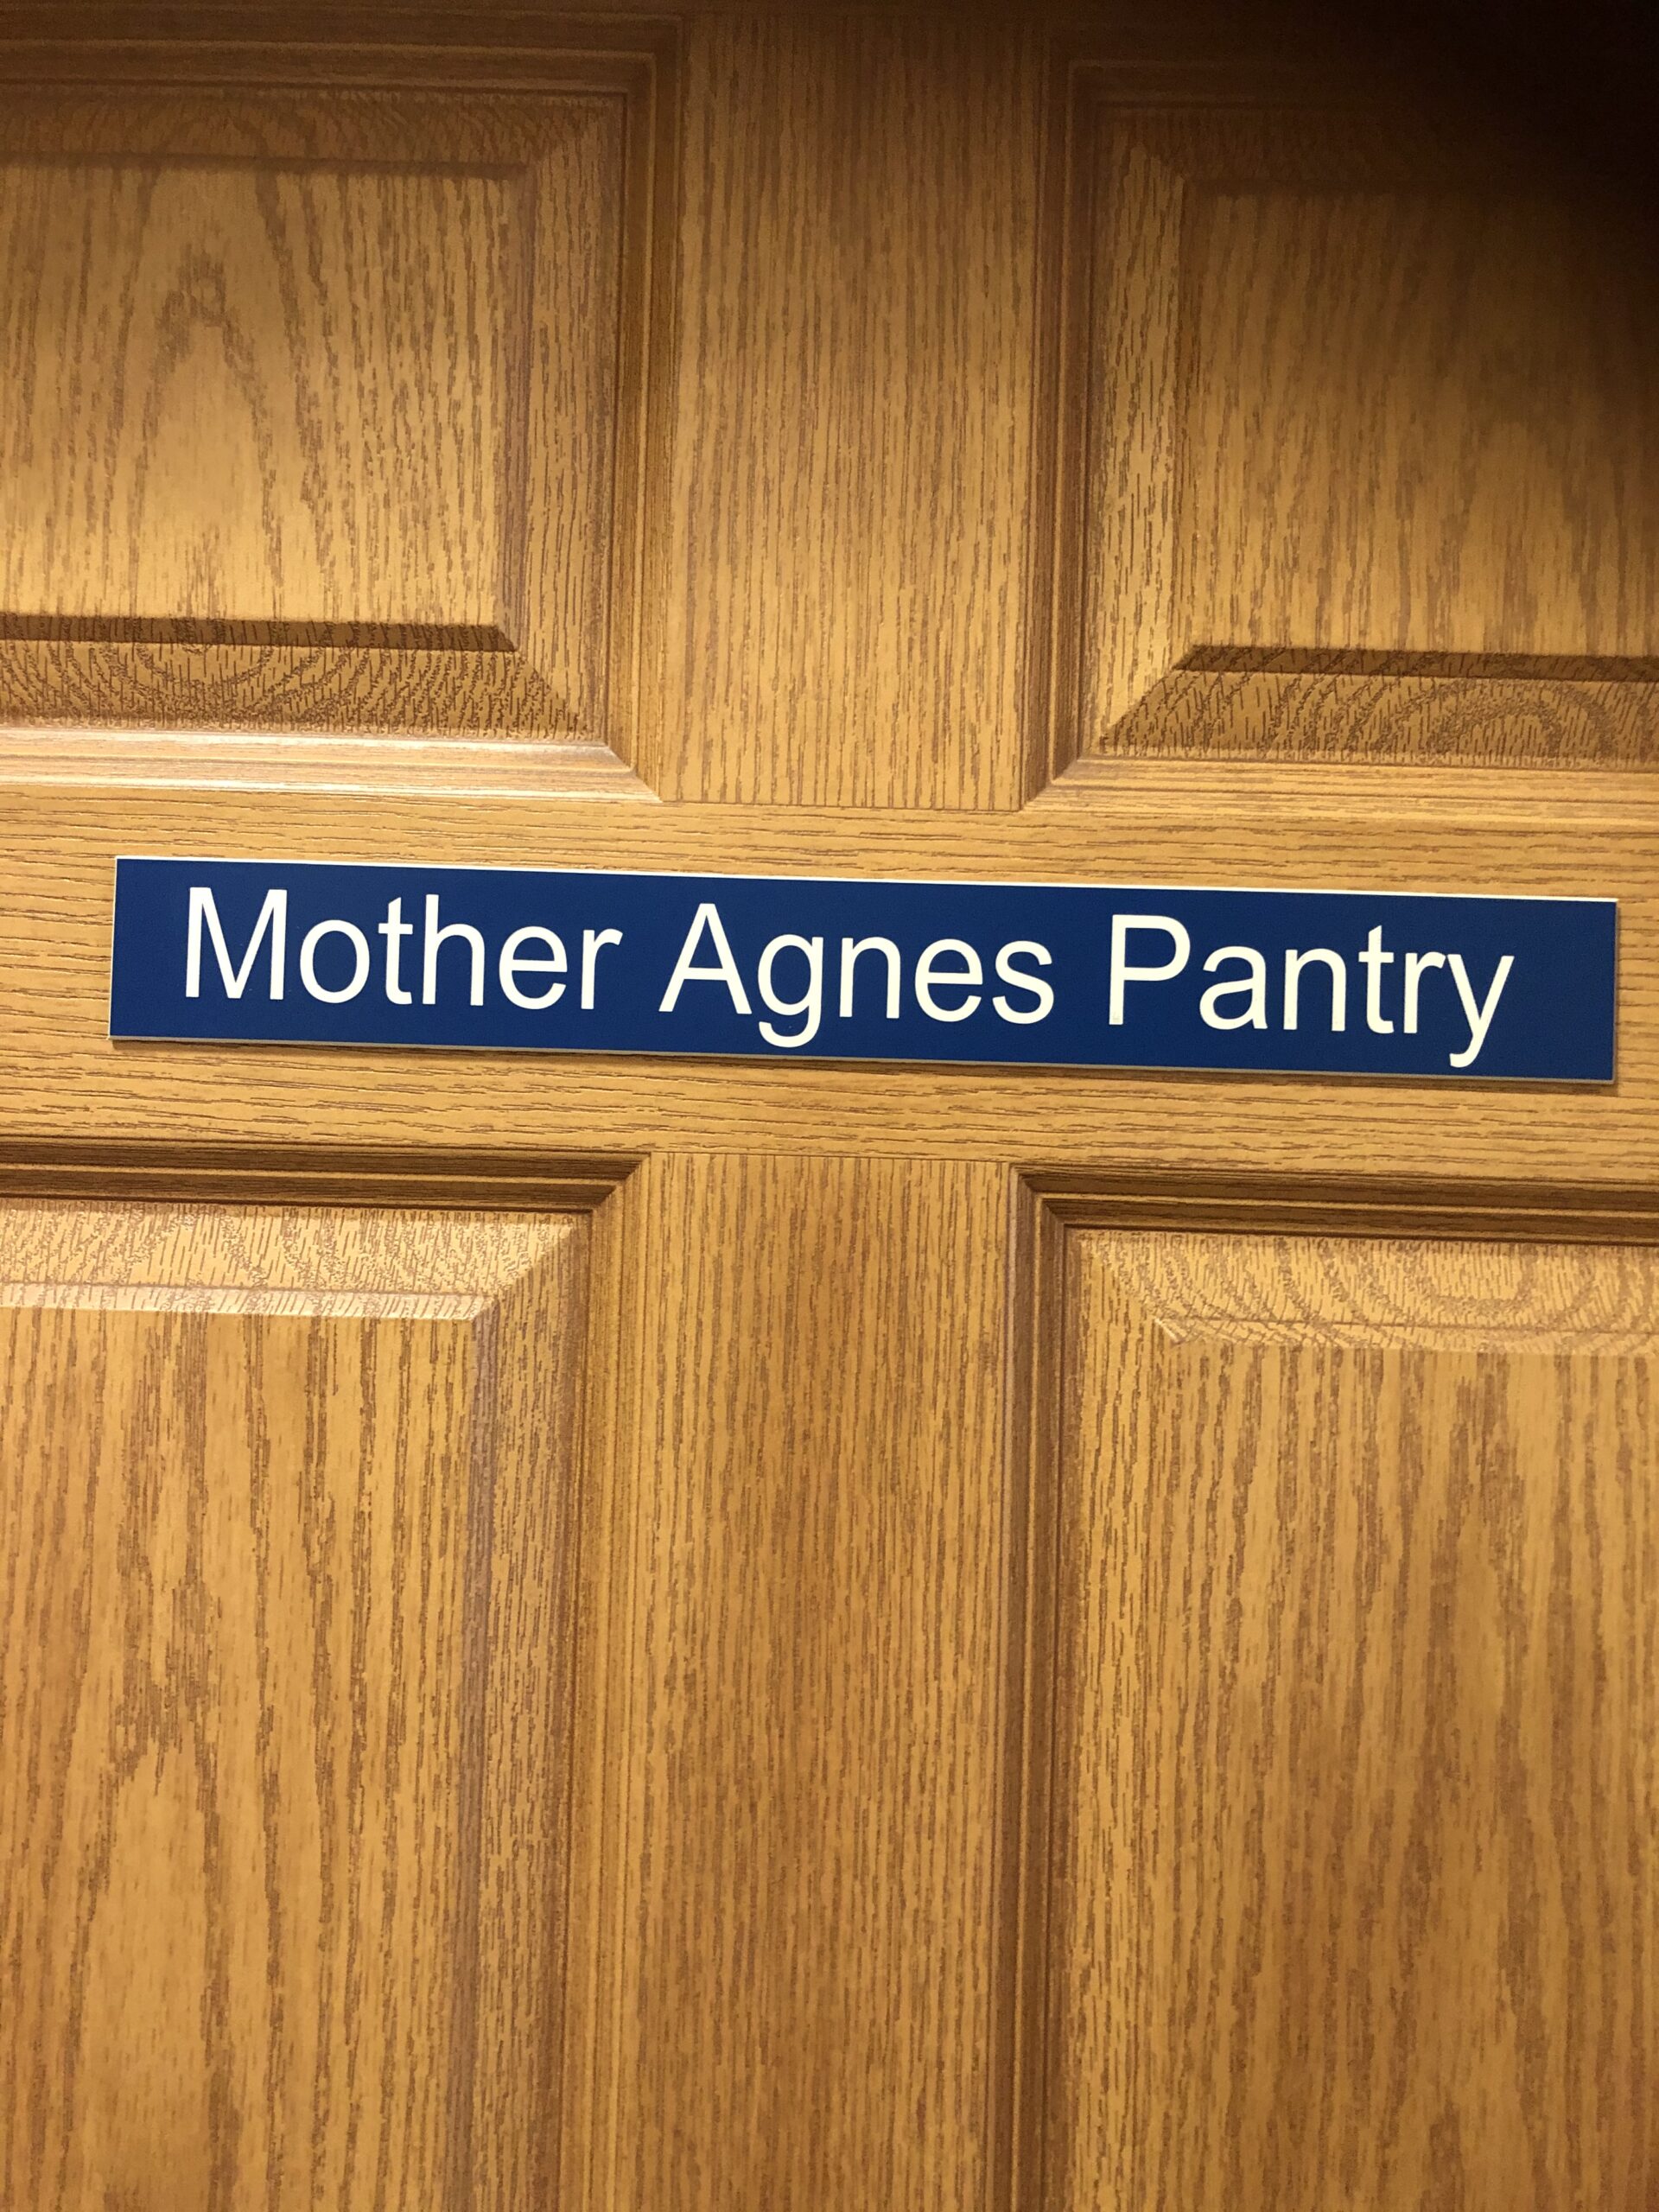 Mother Agnes Pantry